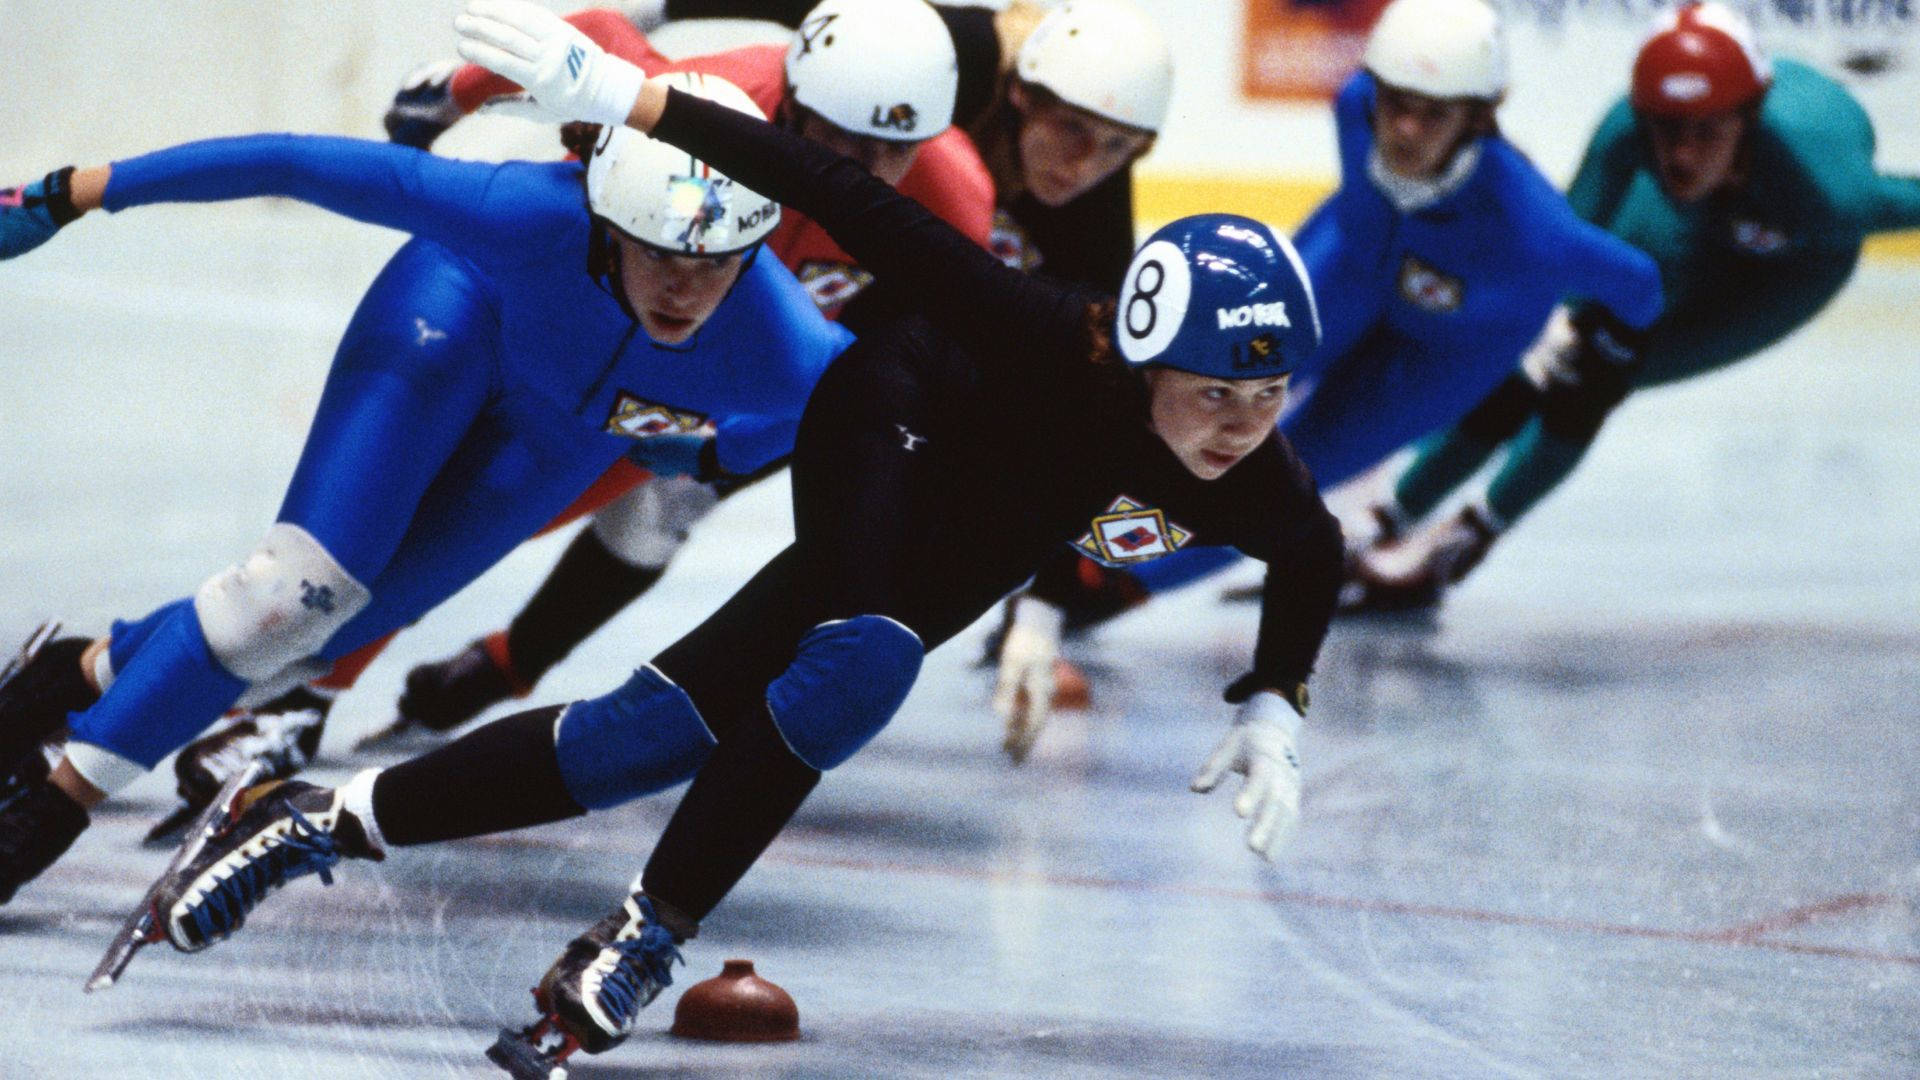 Women Speed Skating In The Ice Wallpaper